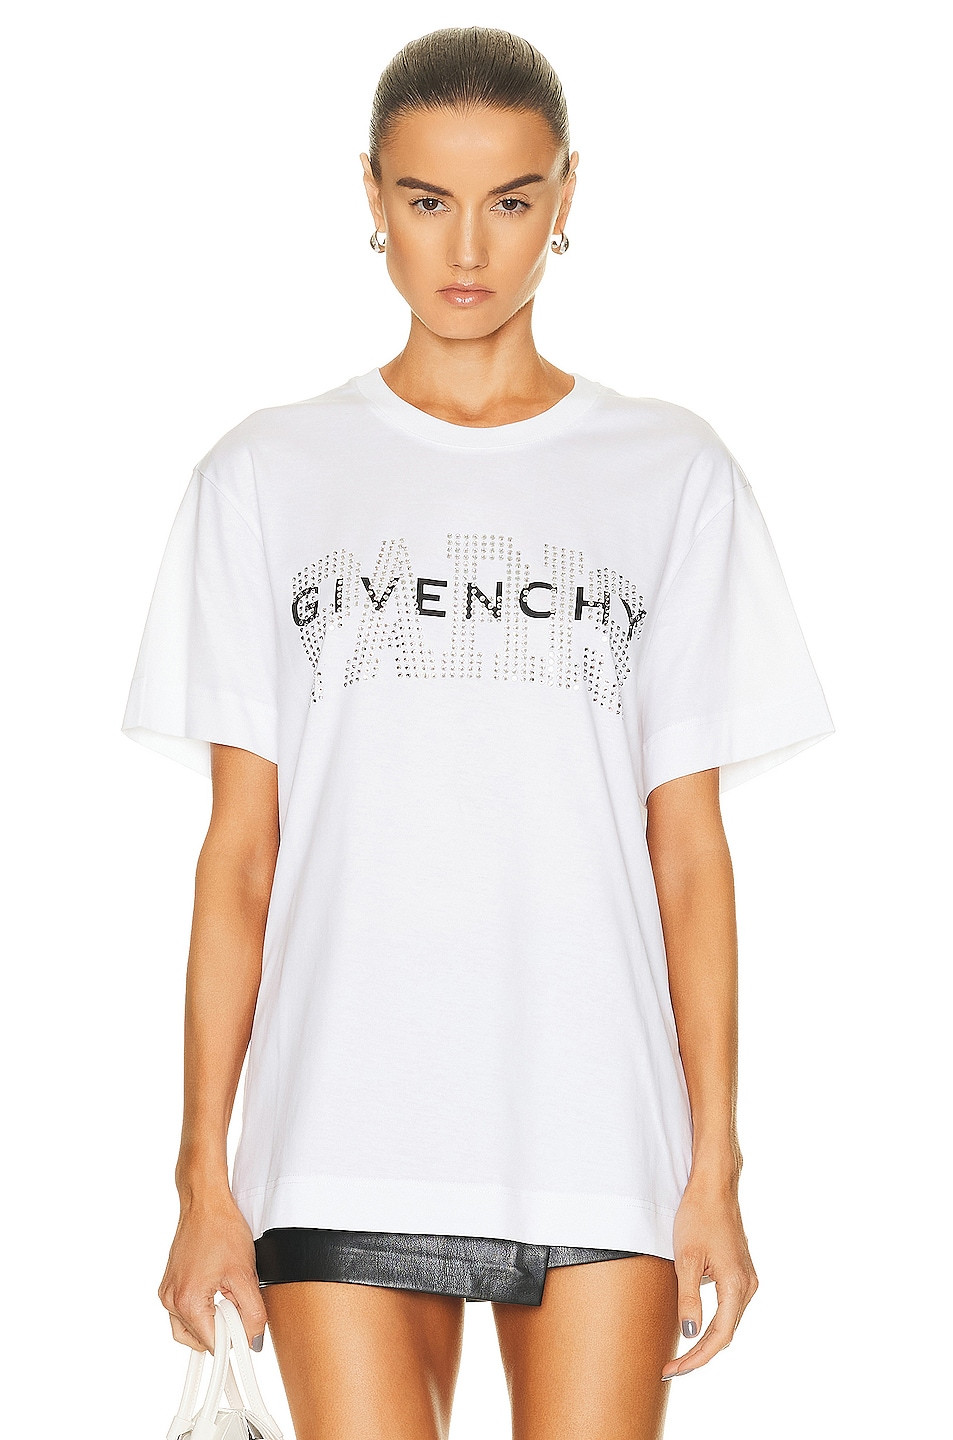 Givenchy Logo T-shirt in White